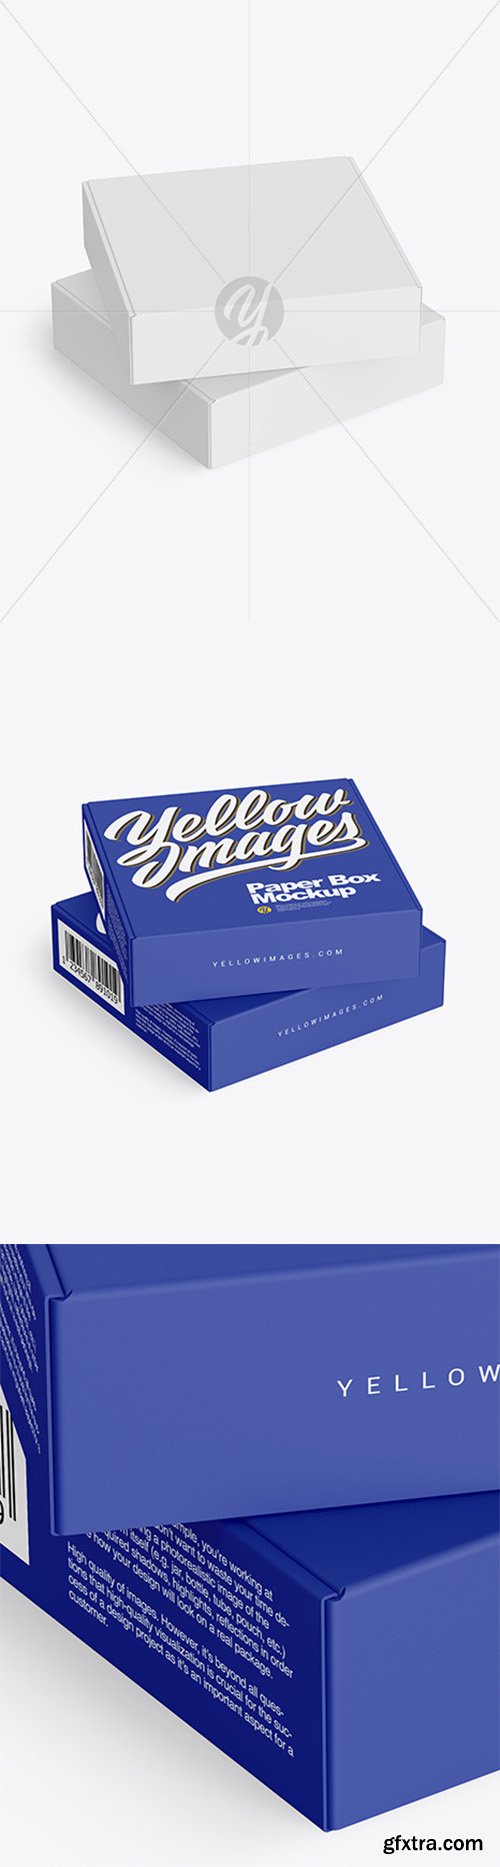 Two Paper Boxes Mockup 52575